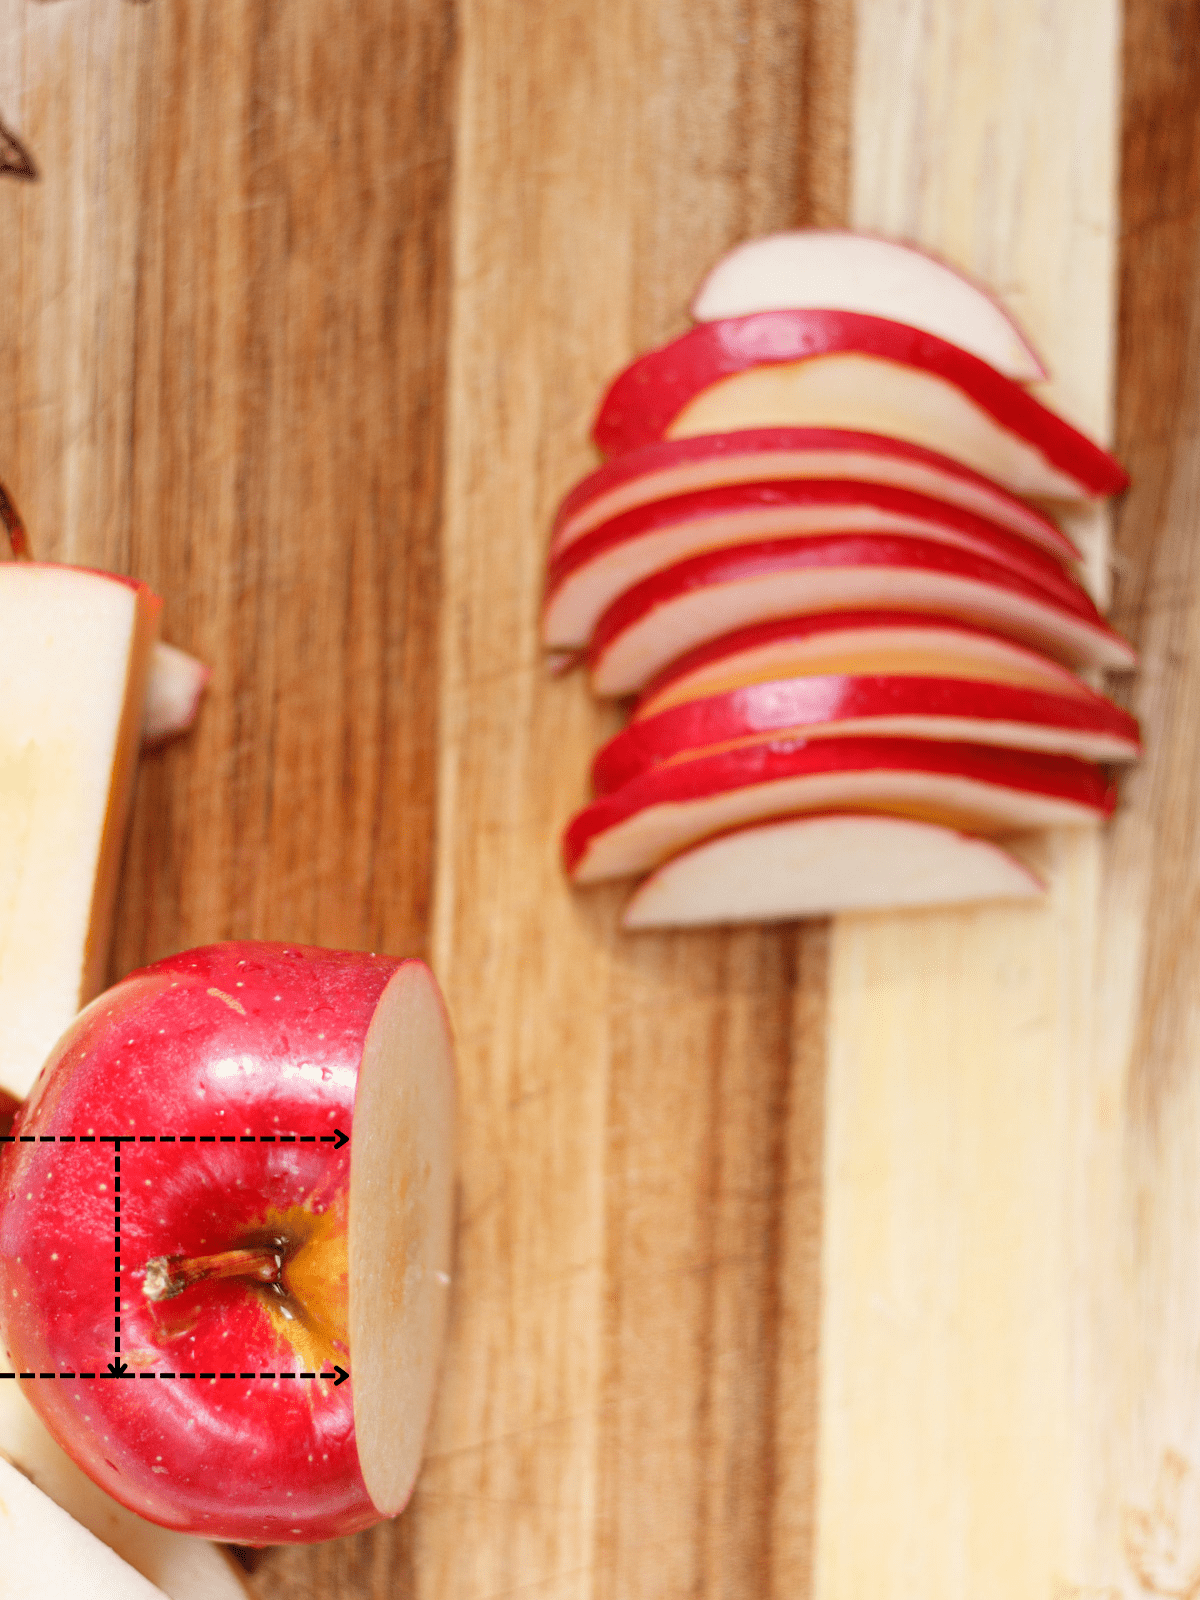 Arrows and lines showing you how to slice an apple.